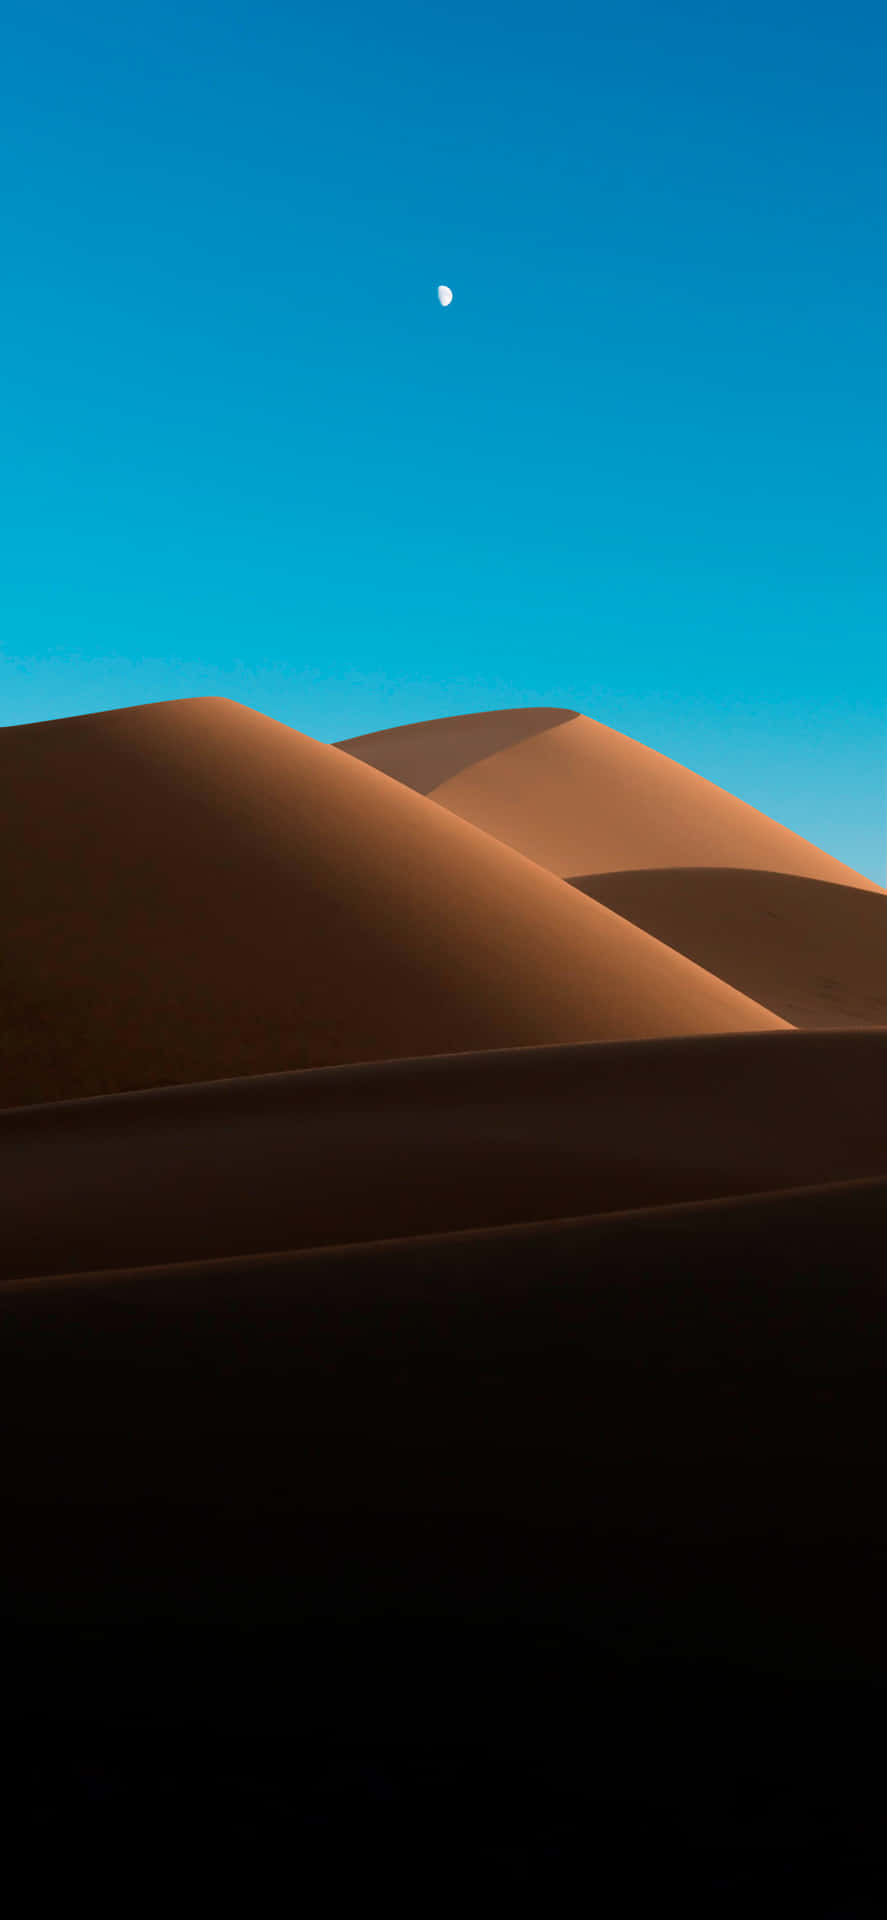 Explore The Beauty Of The Desert With An Iphone Wallpaper